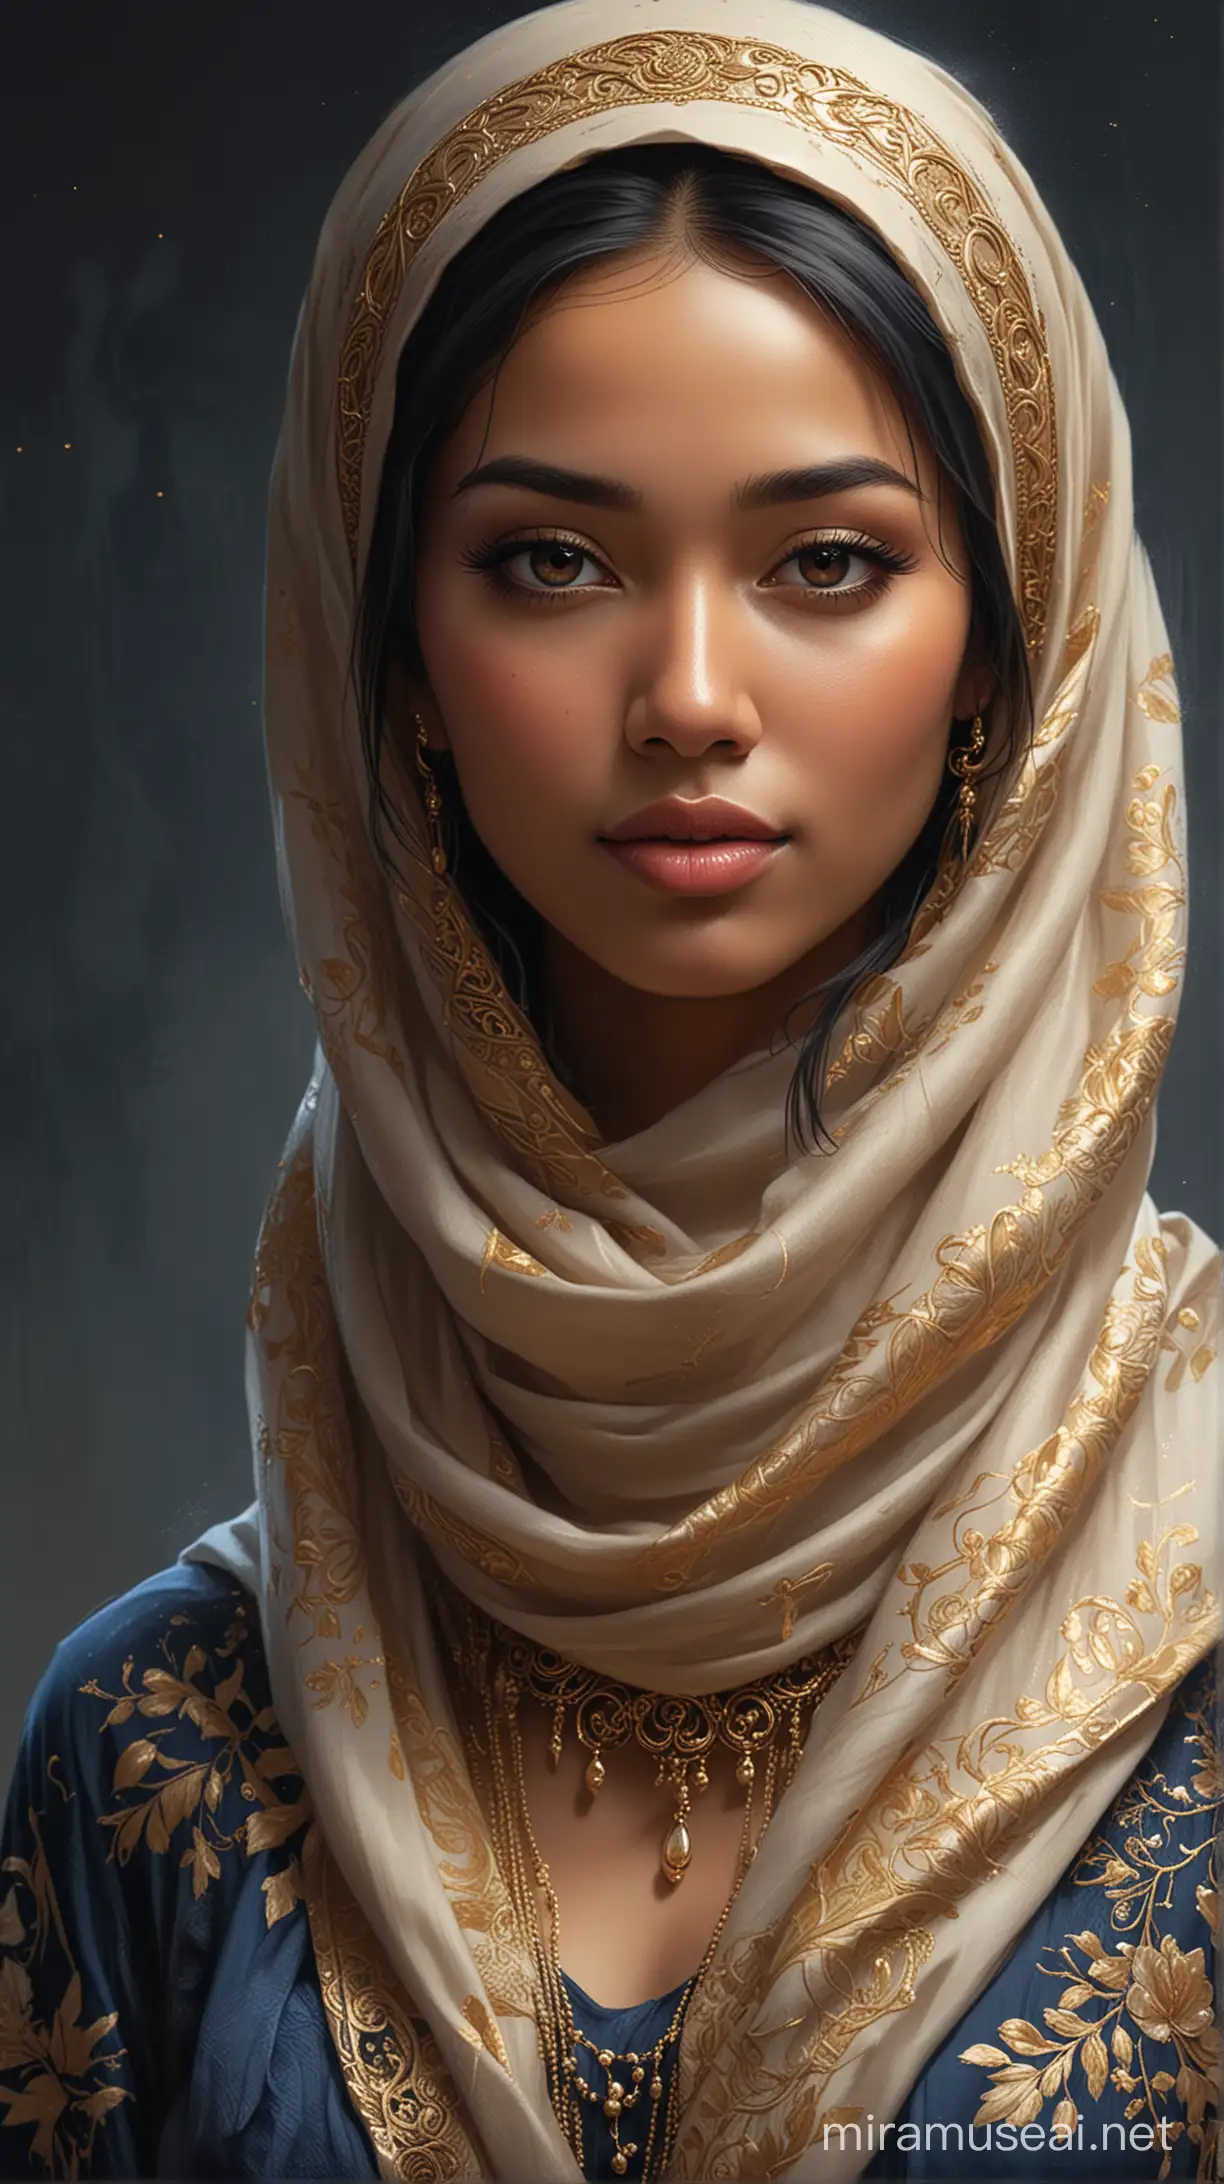 Malay Woman in Hijab and Shawl with Gold Accents A Charlie Bowater Style Portrait